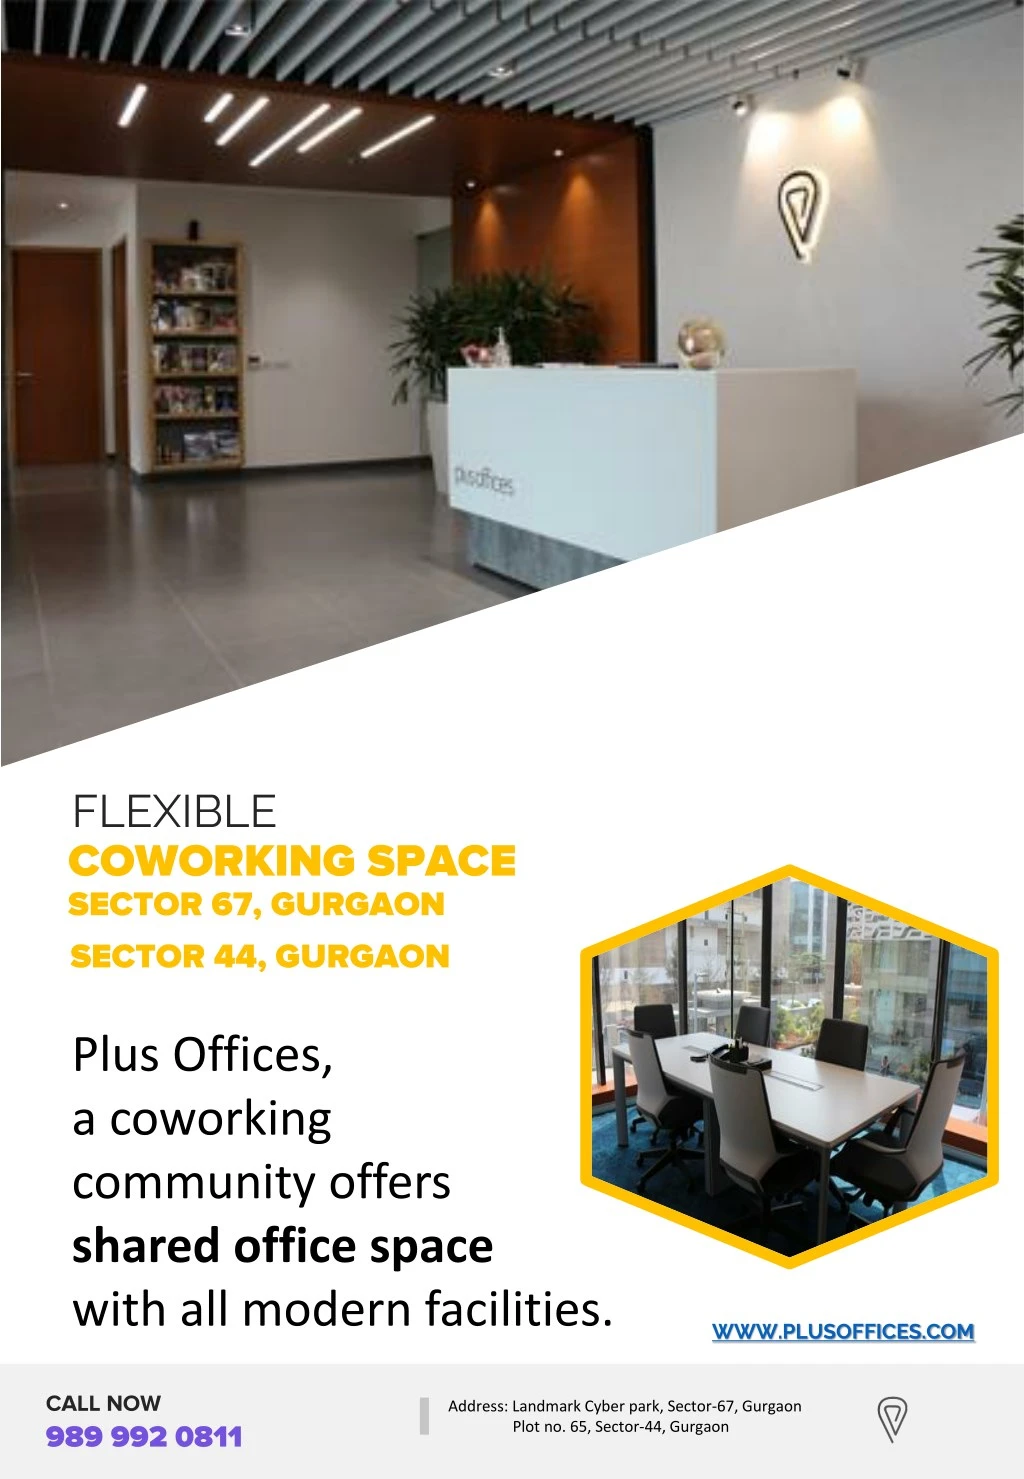 flexible coworking space sector 67 gurgaon